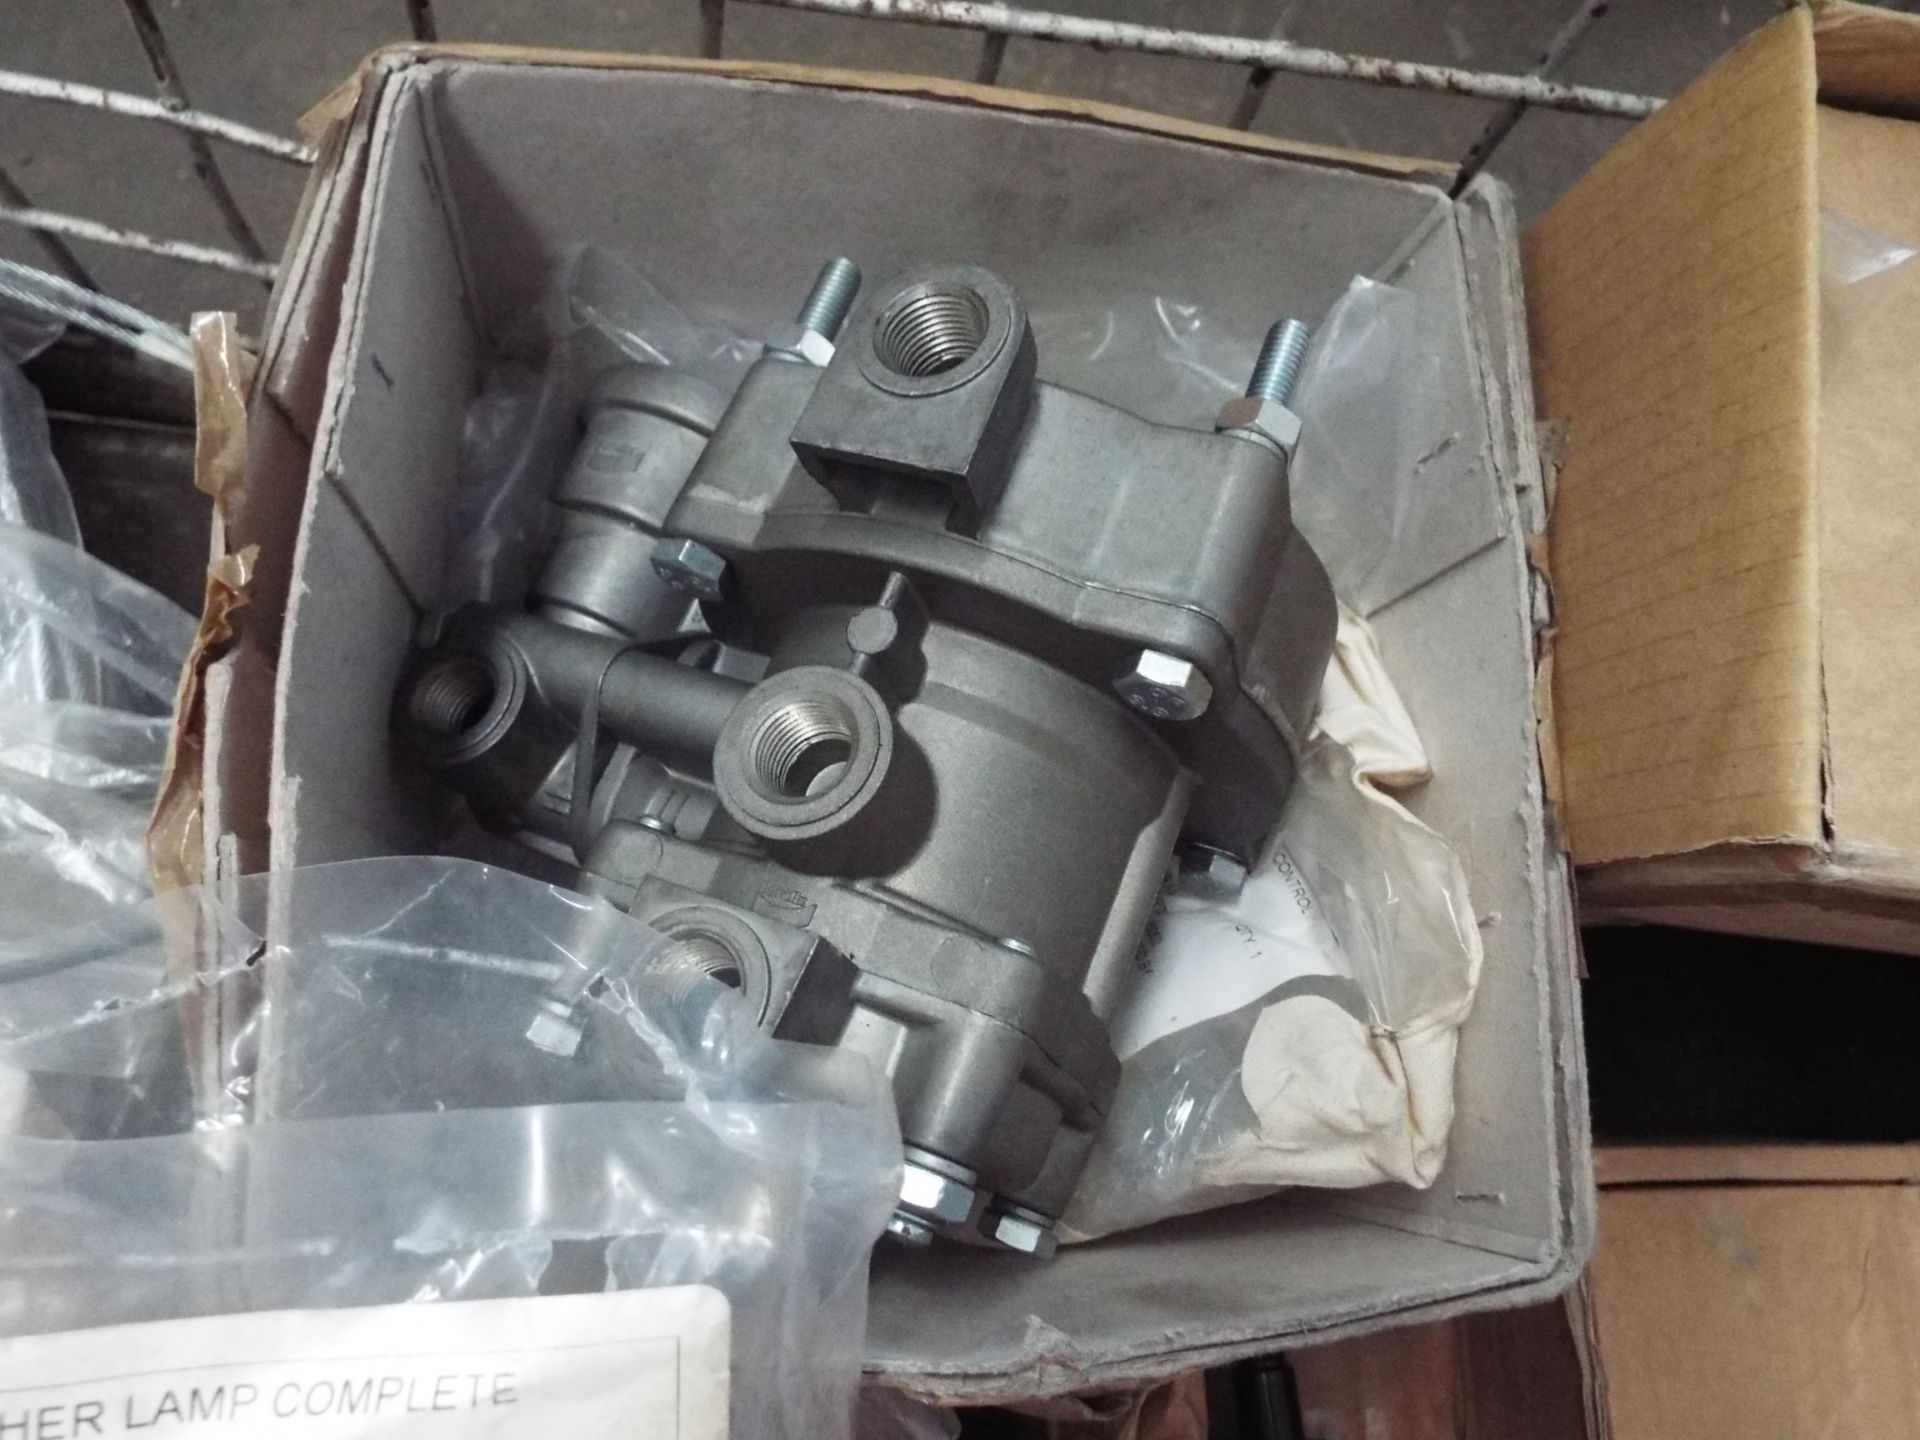 Mixed Stillage of Land Rover and Truck Parts consisting of Valve, Pump, Shock Absorbers, Lamps etc - Image 3 of 10